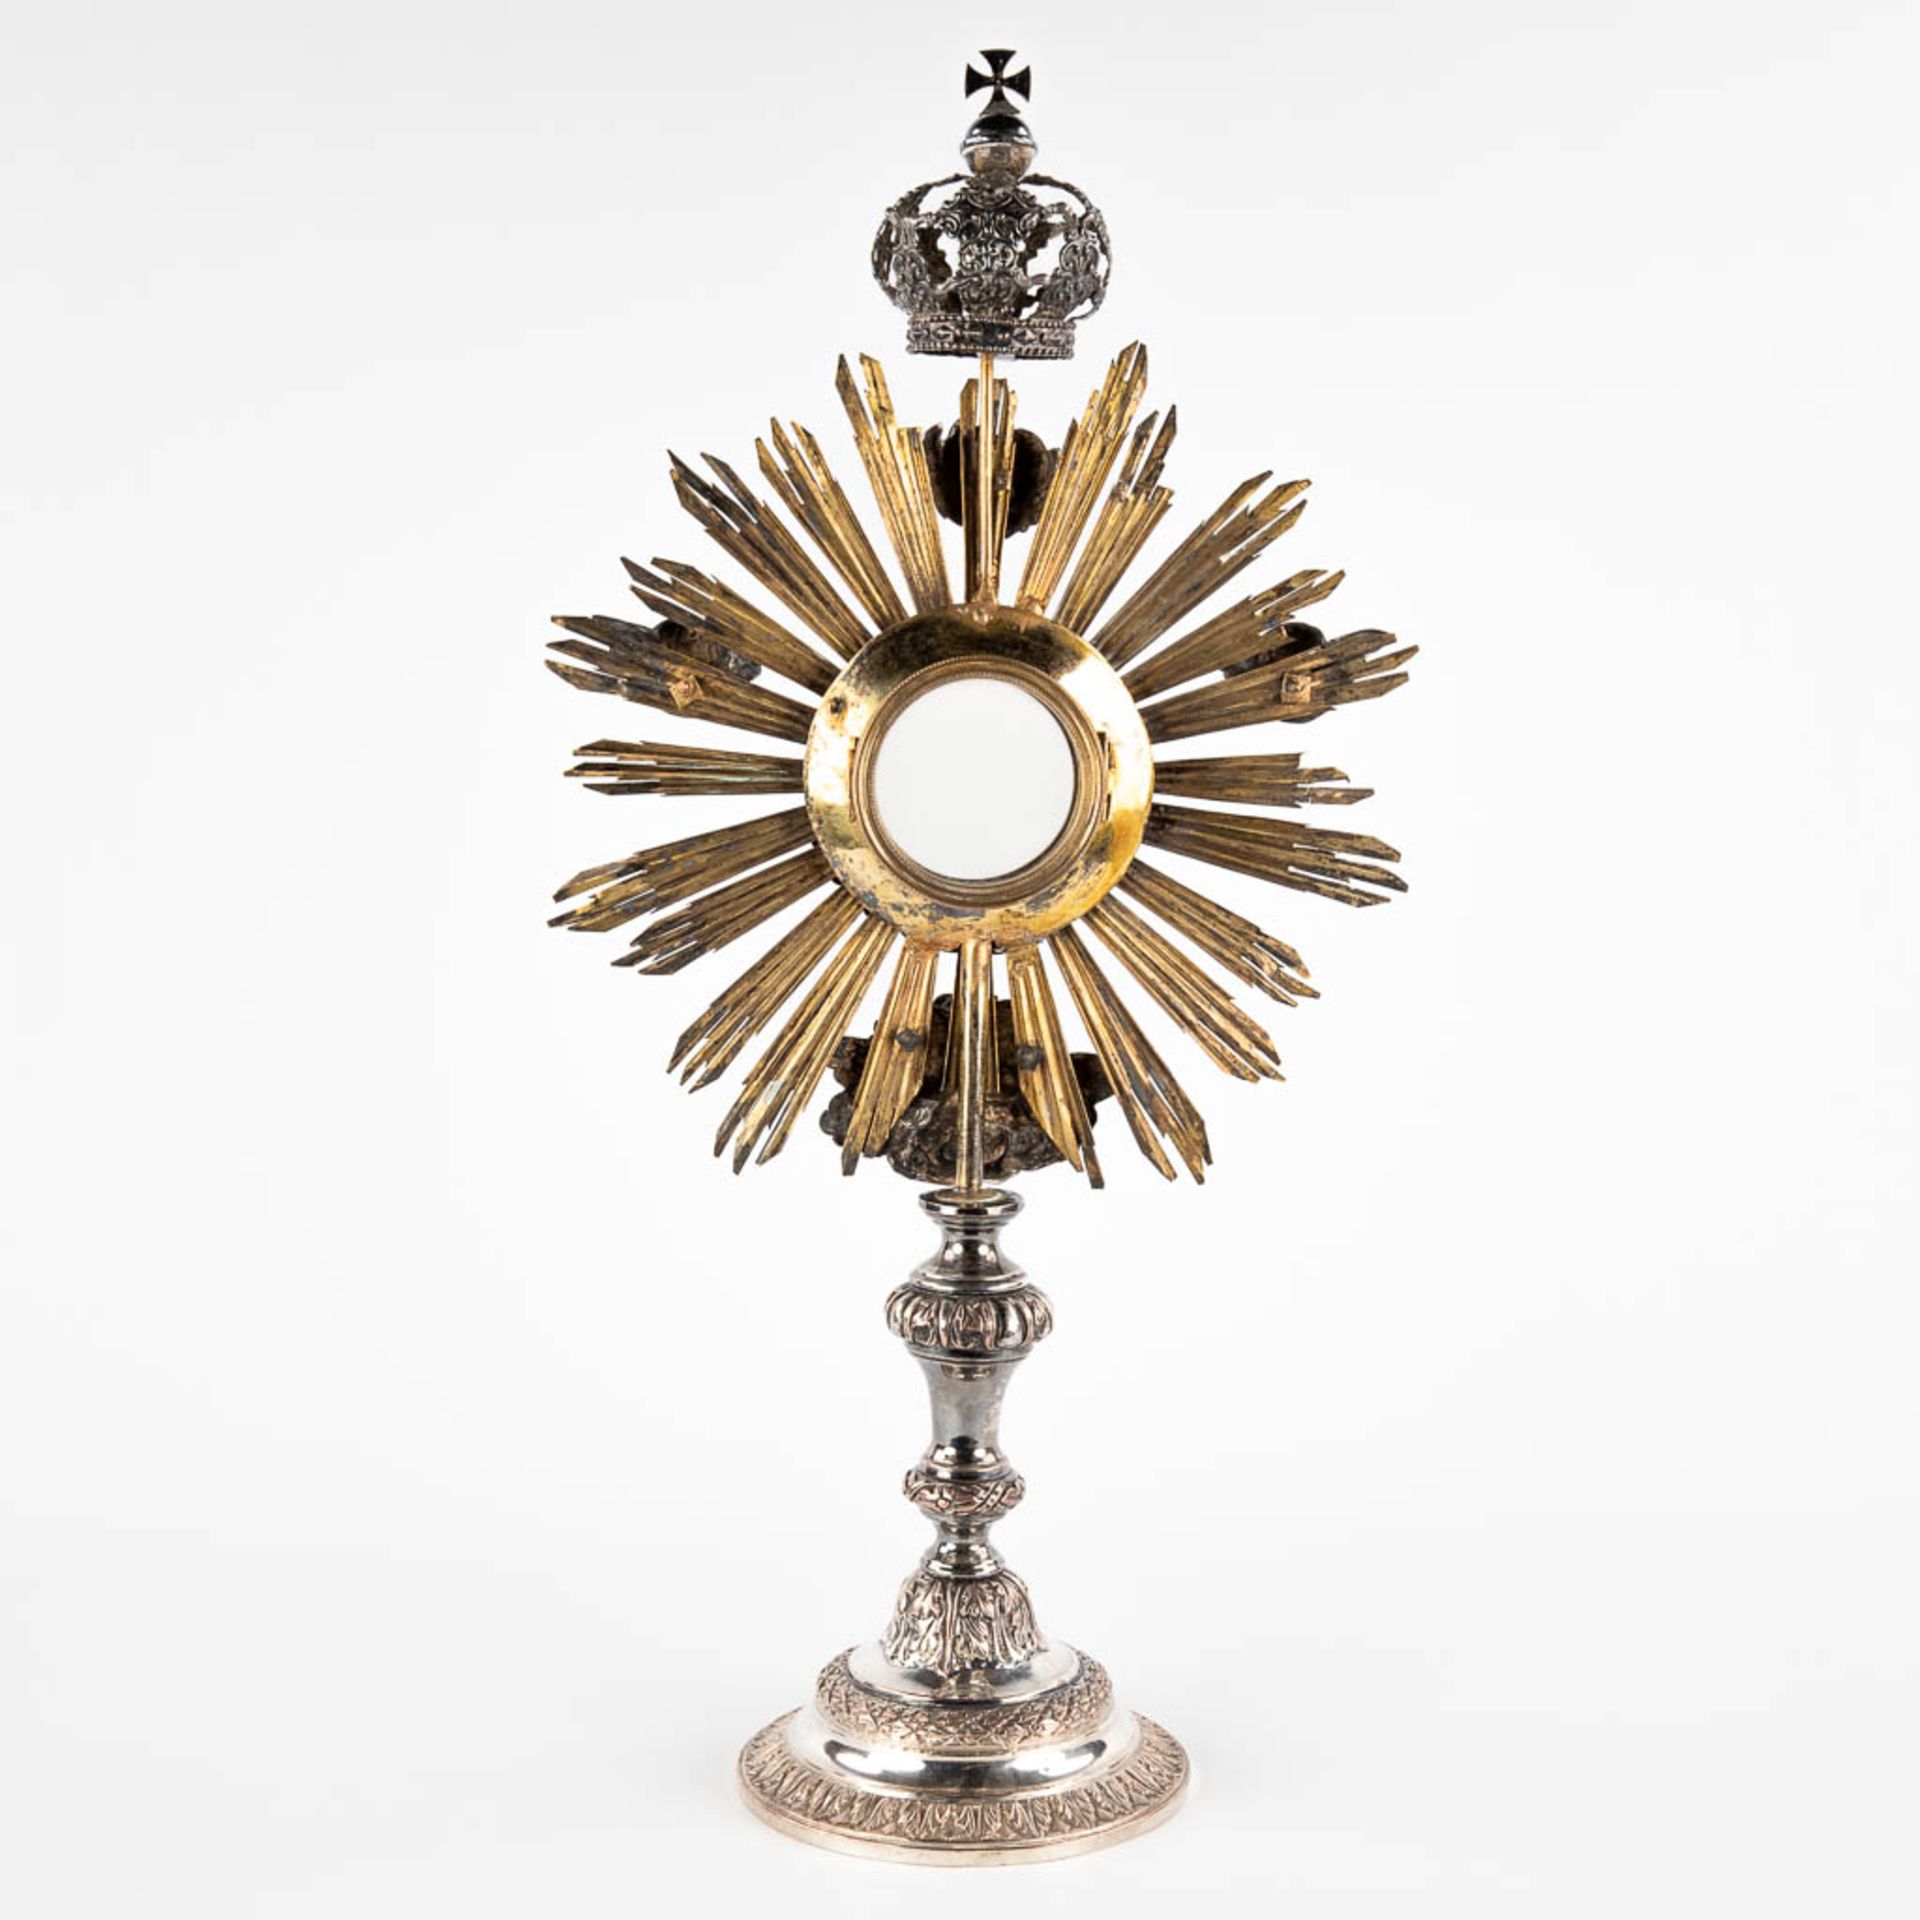 A sunburst monstrance, silver-plated metal and brass. Circa 1900. (D:15 x W:29 x H:57 cm) - Image 5 of 14